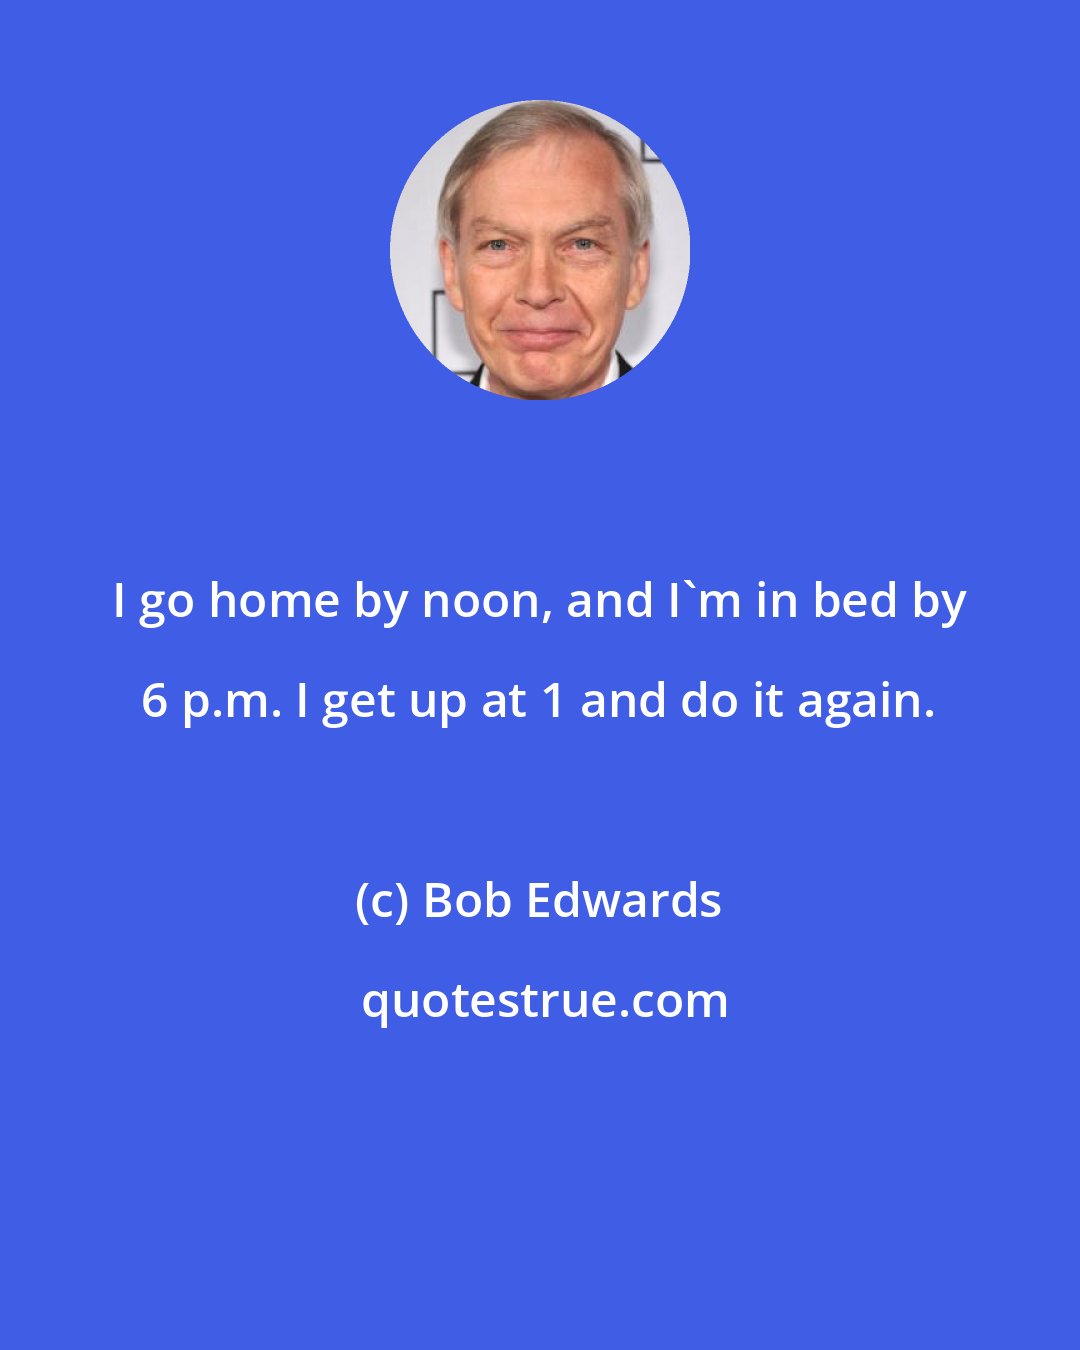 Bob Edwards: I go home by noon, and I'm in bed by 6 p.m. I get up at 1 and do it again.